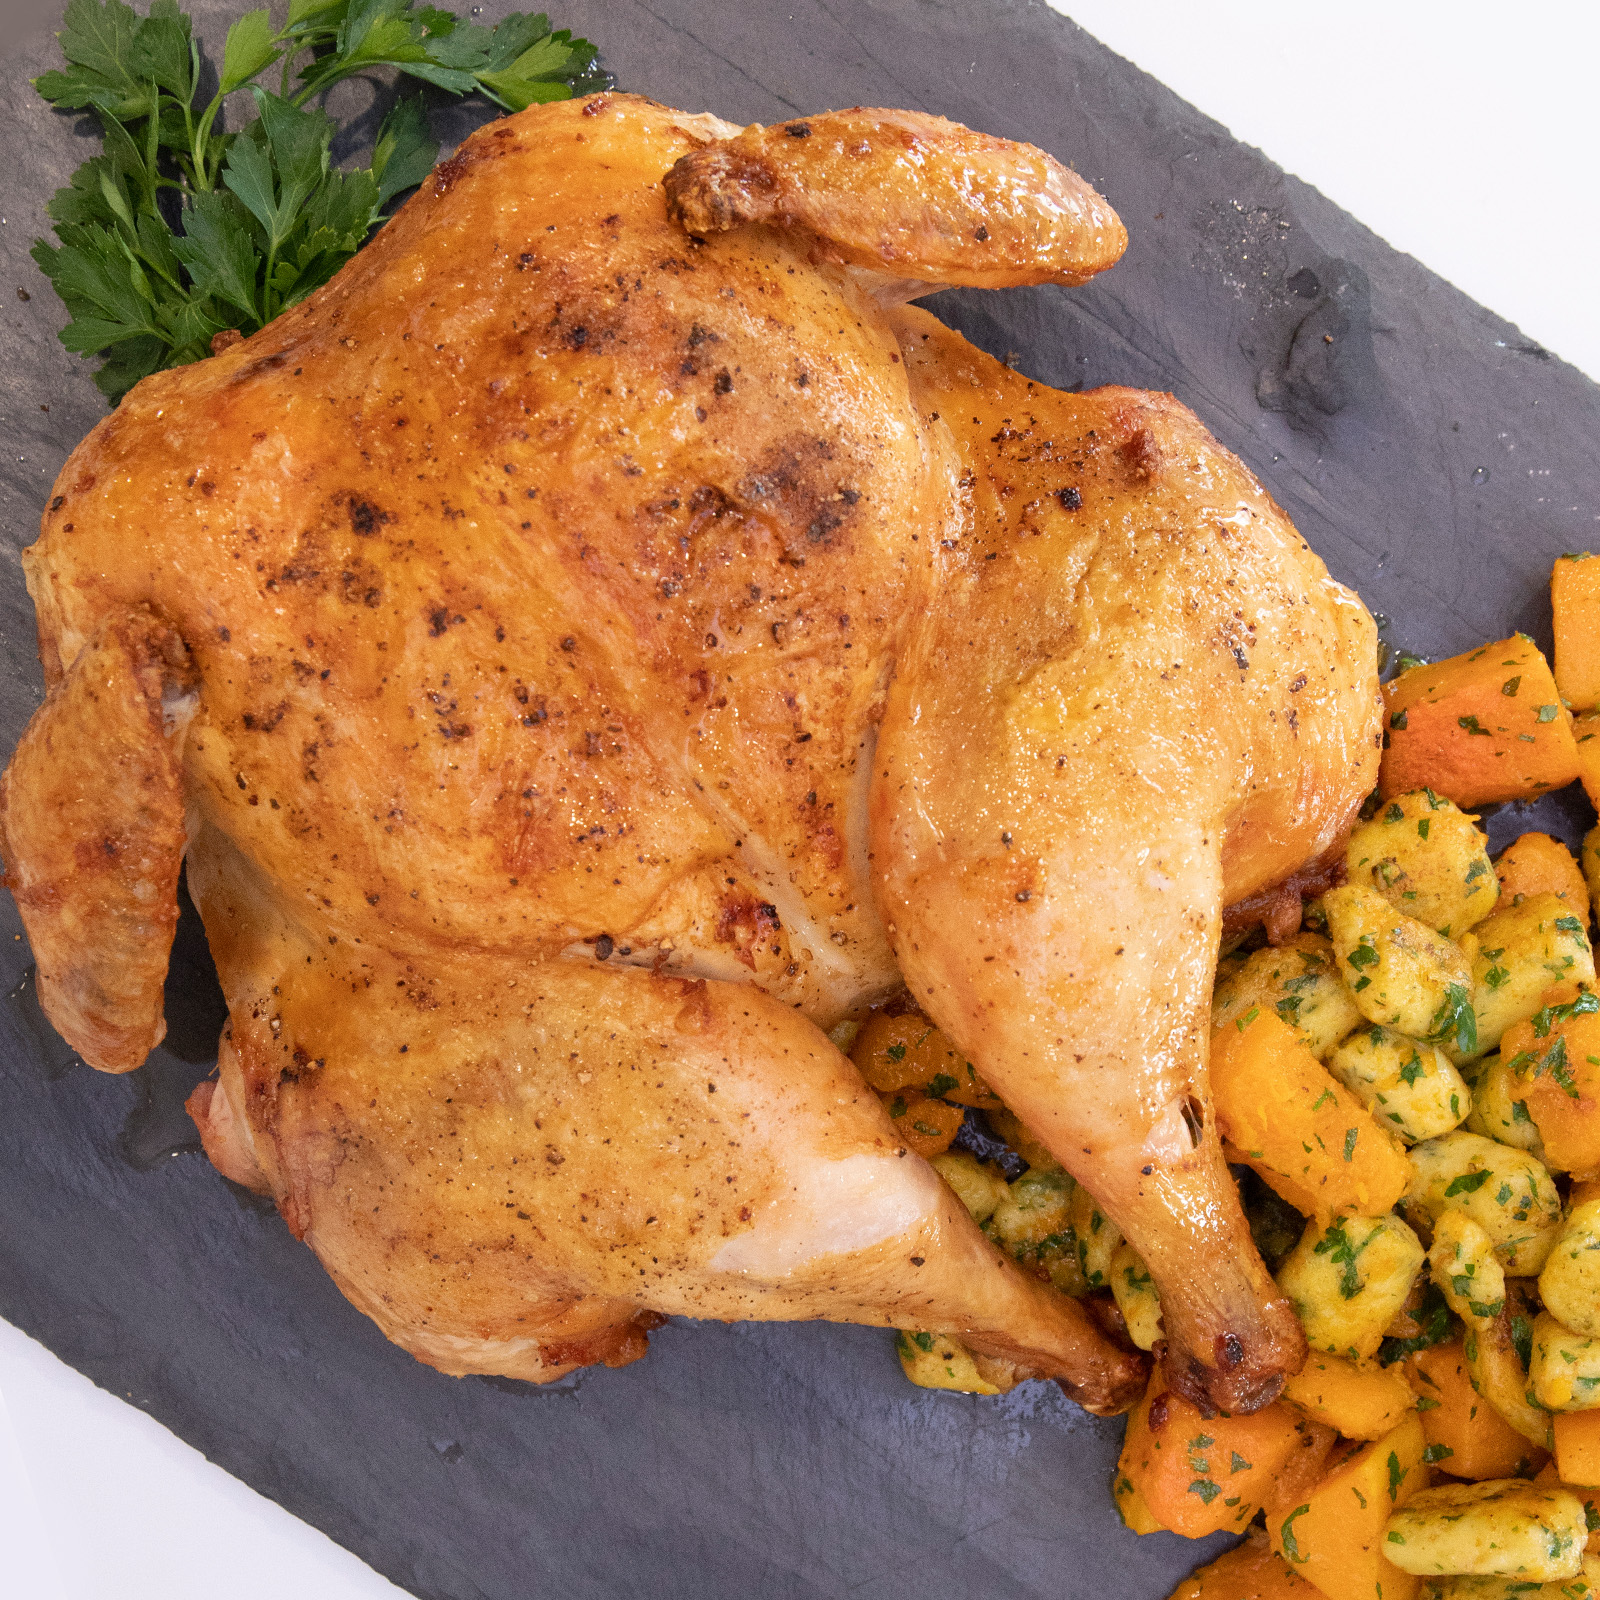 Roasted Whole Chicken With Gluten-Free Parisian Gnocchi &amp; Roasted Winter Squash